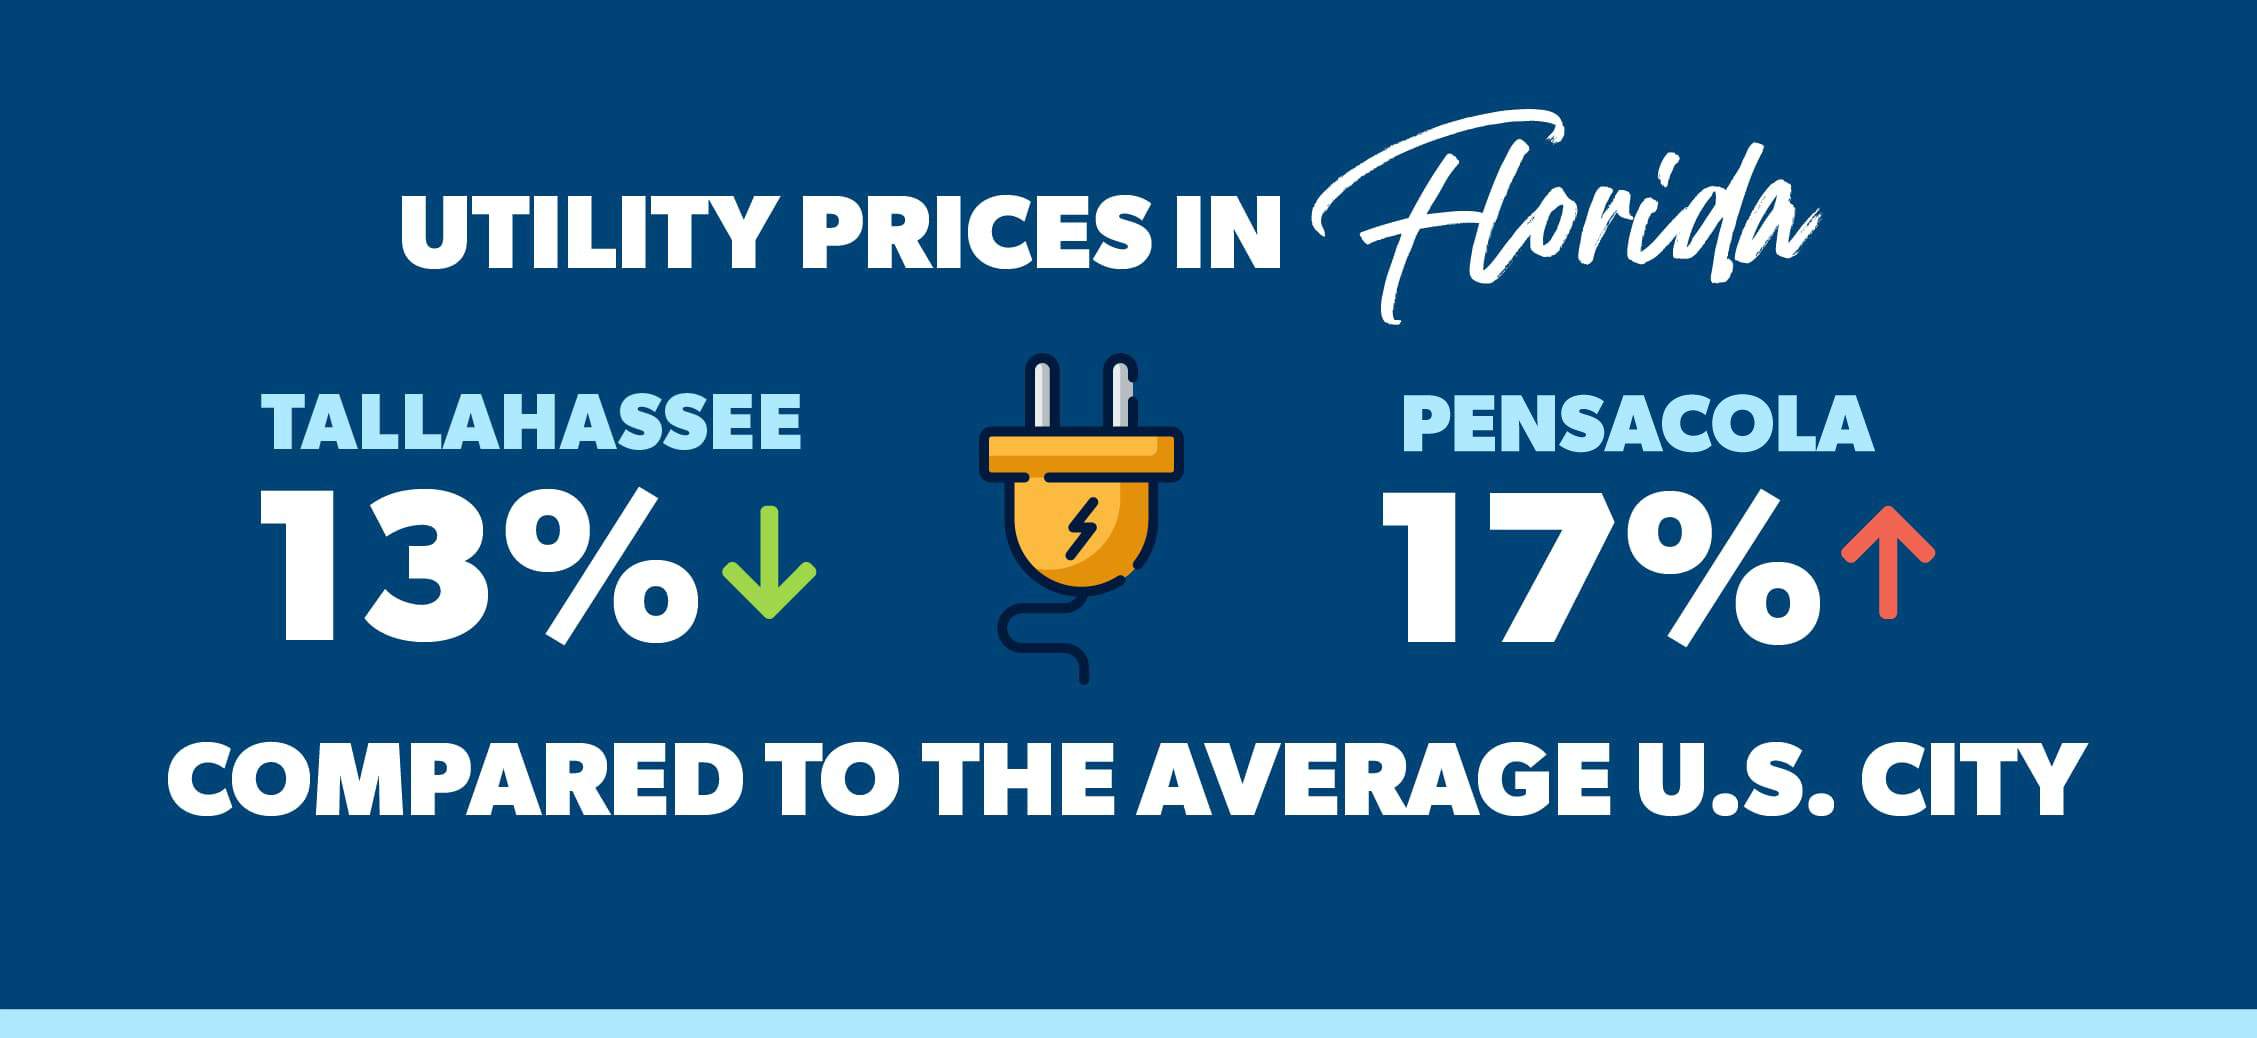 graphic of utilities prices in florida